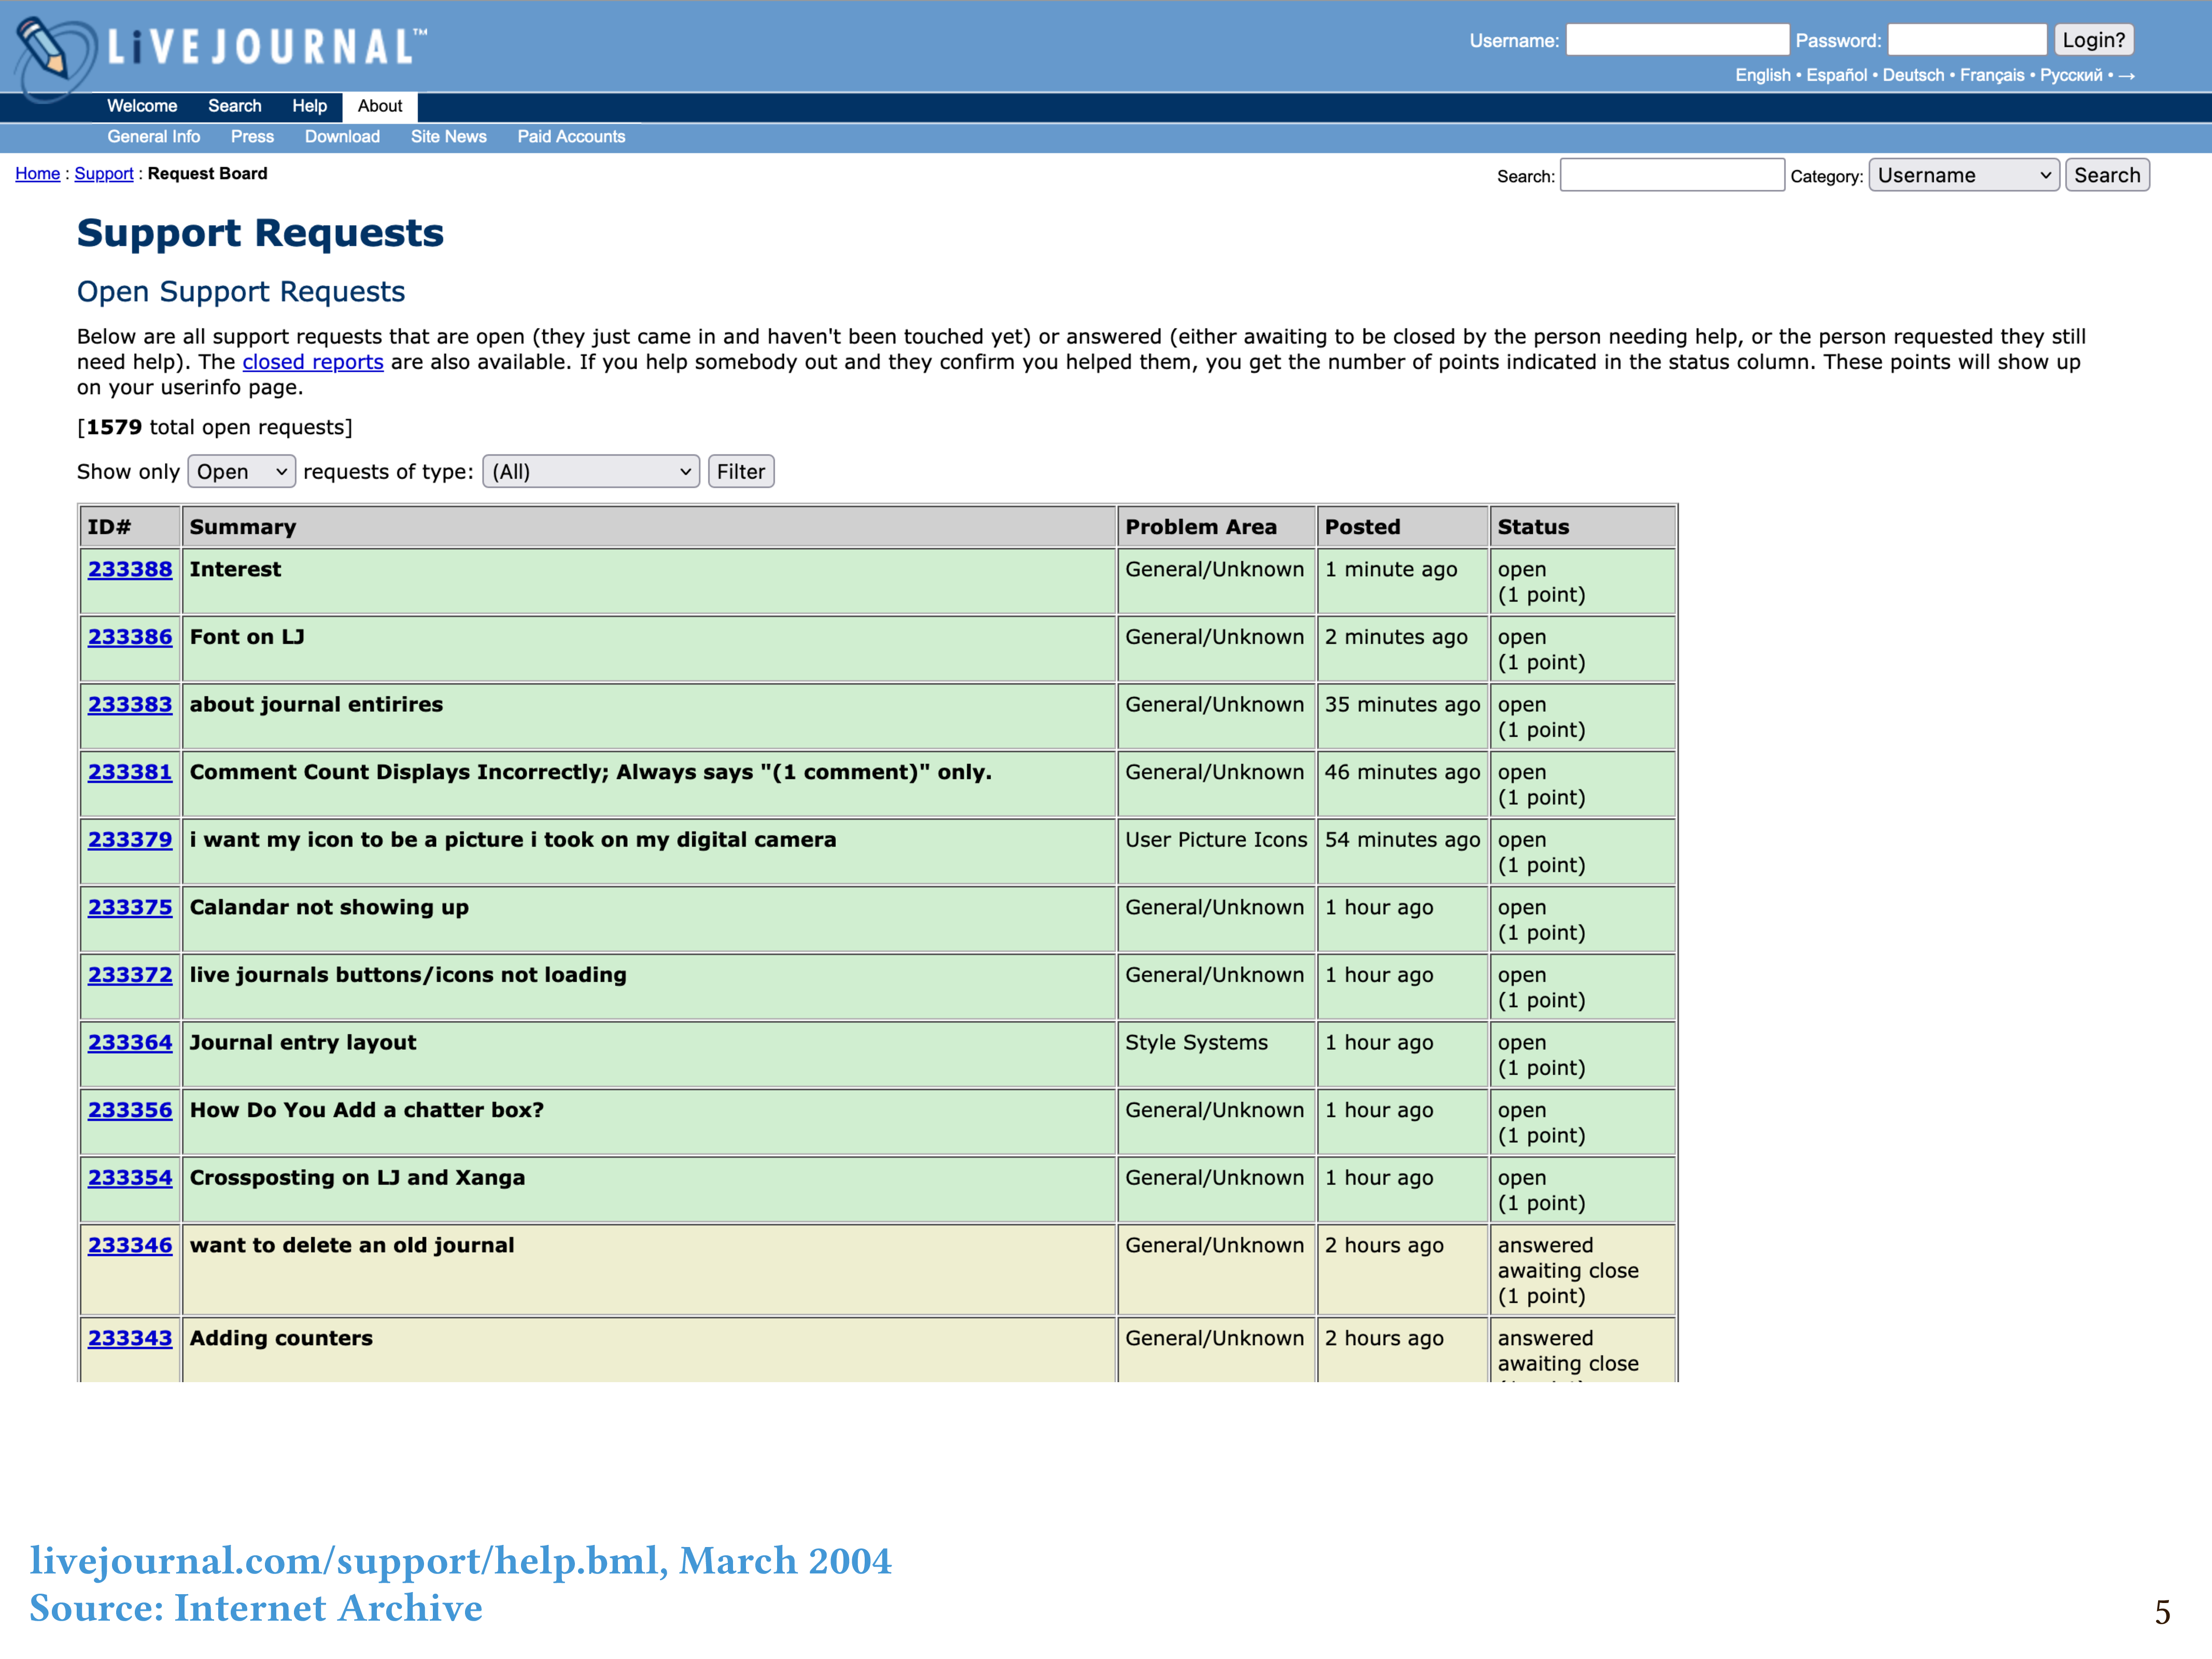 A screenshot of the LiveJournal open support requests page, as archived by the Internet Archive in March 2004.  There are 1579 open requests, including several posted within the last hour that haven't been responded to yet.